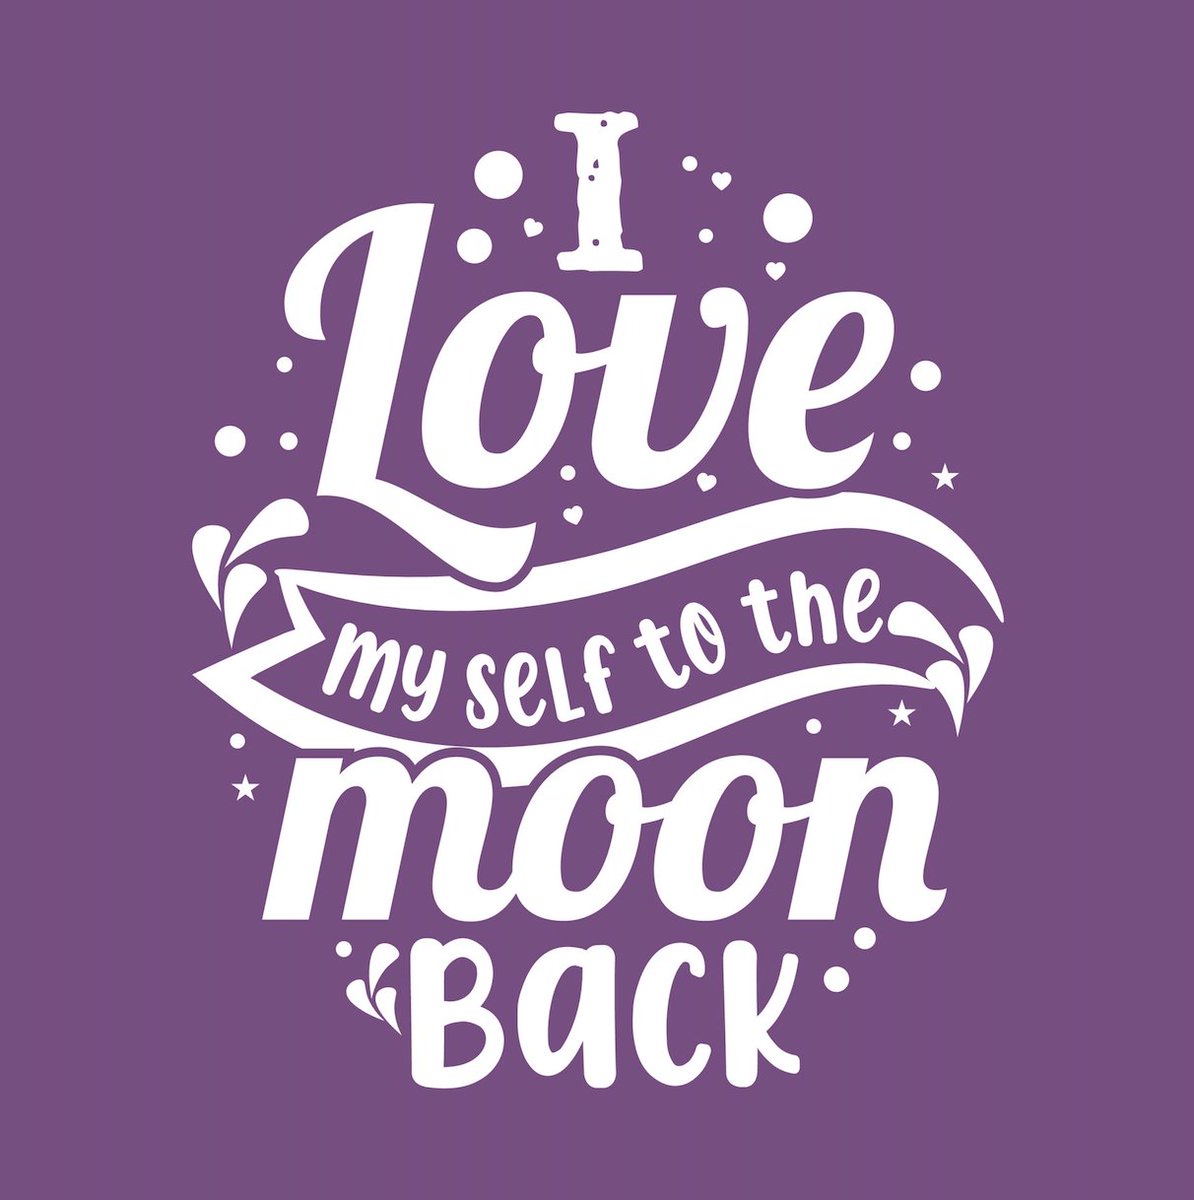 I Love Myself to the Moon & Back

#LivingLovingLife #GreatResignation
#OnlineIncomeOpportunity #WorkFromAnywhere #OnlineBusinessSolution #worksmarternotharder